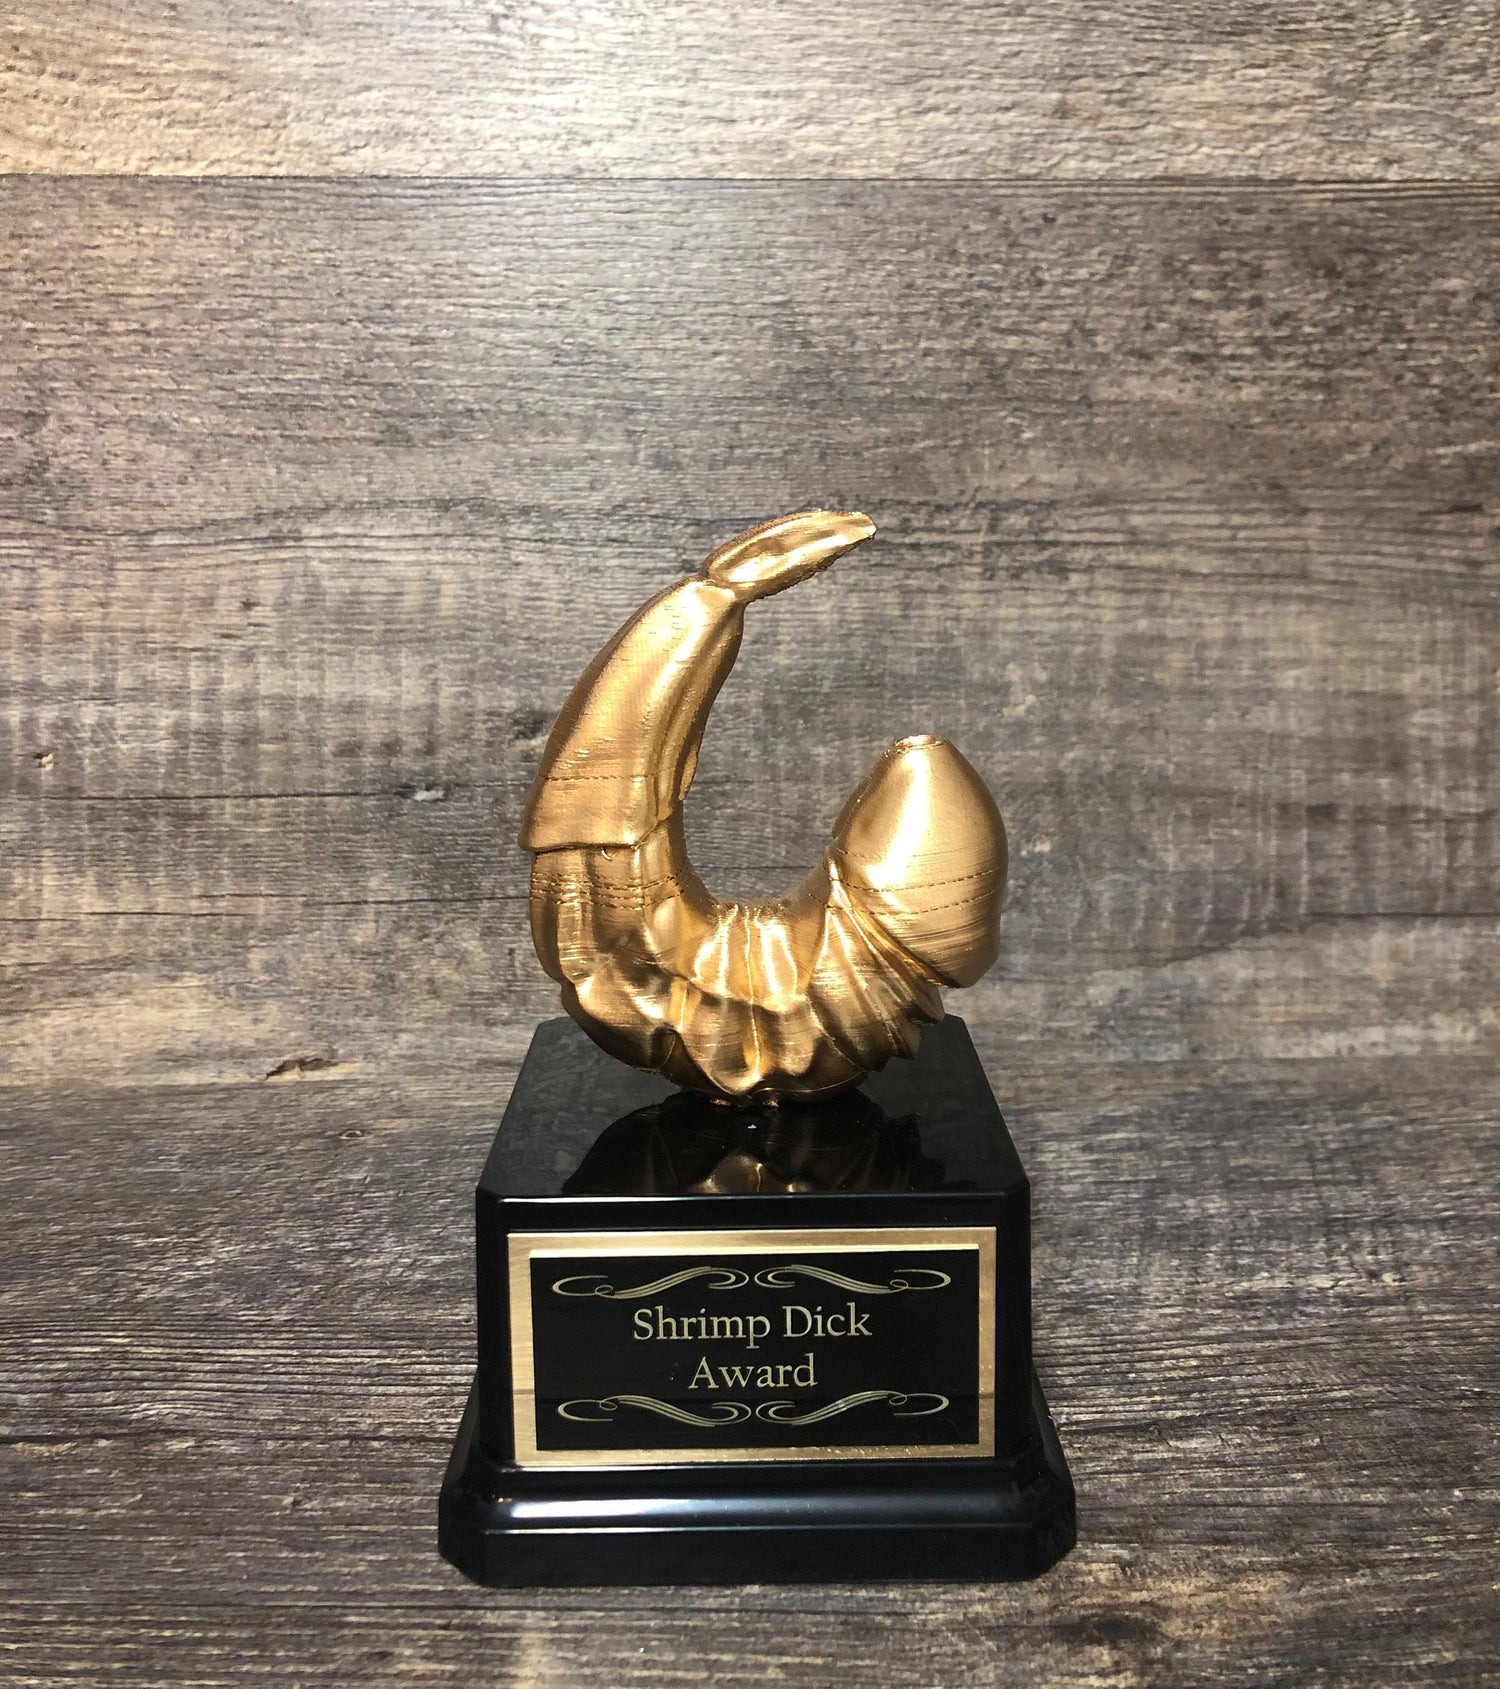 Funny Shrimp Dick Trophy Ball Buster Award LOSER Sacko Trophy FFL Last Place Penis Trophy You're A Dick Dickhead